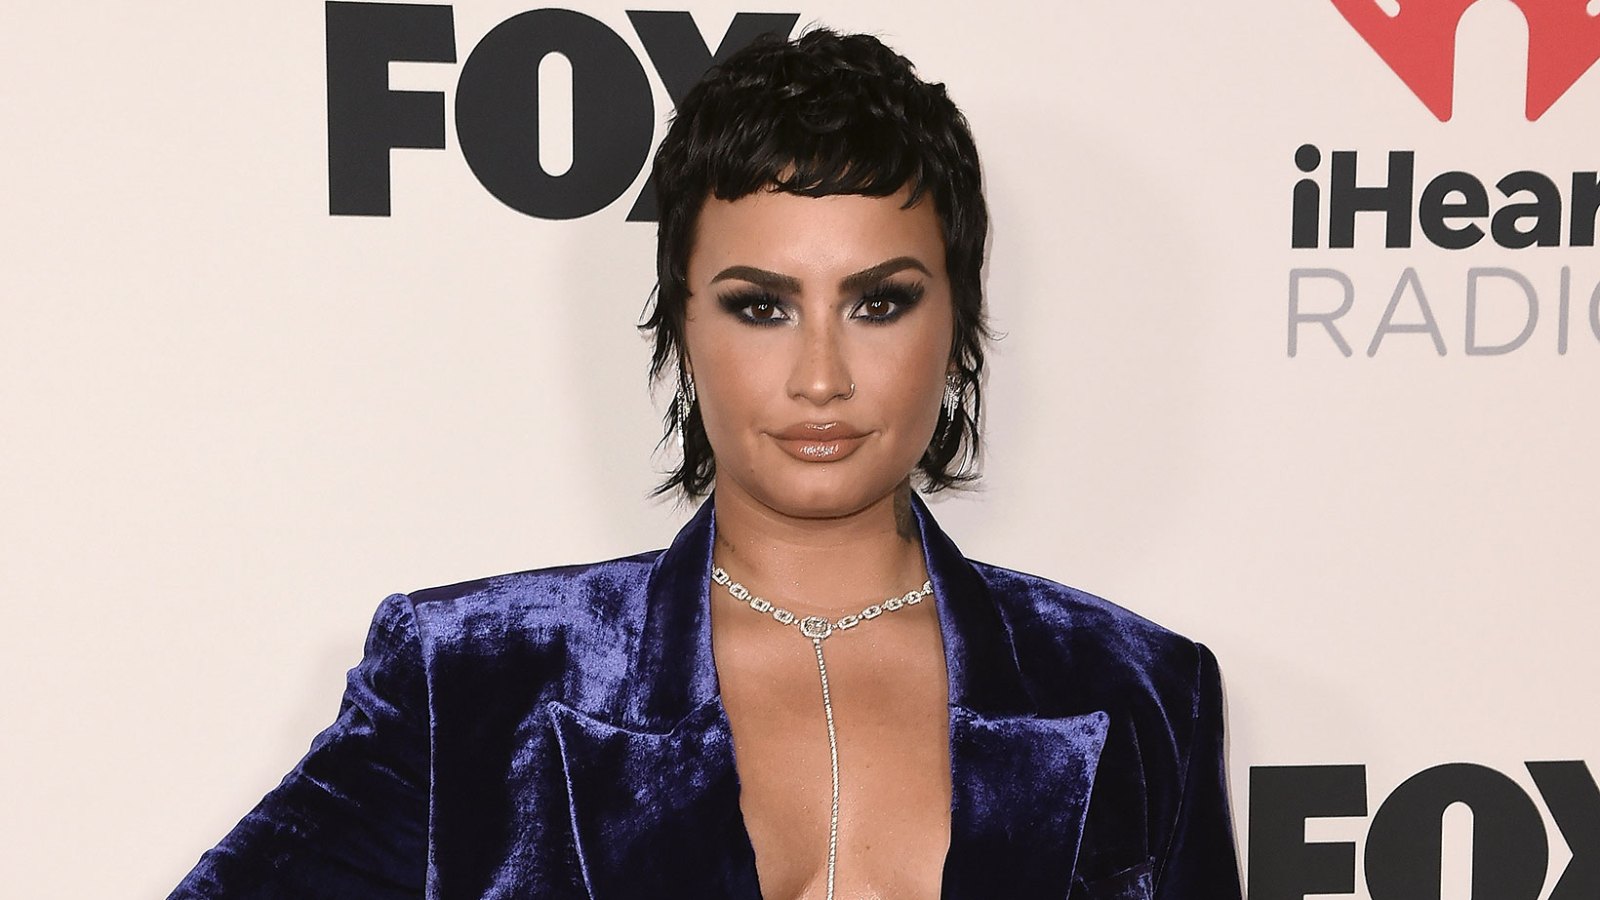 Demi Lovato Updates Pronouns to Include She/Her' After Feeling a ‘Balance in Her Masculine and Feminine Energy